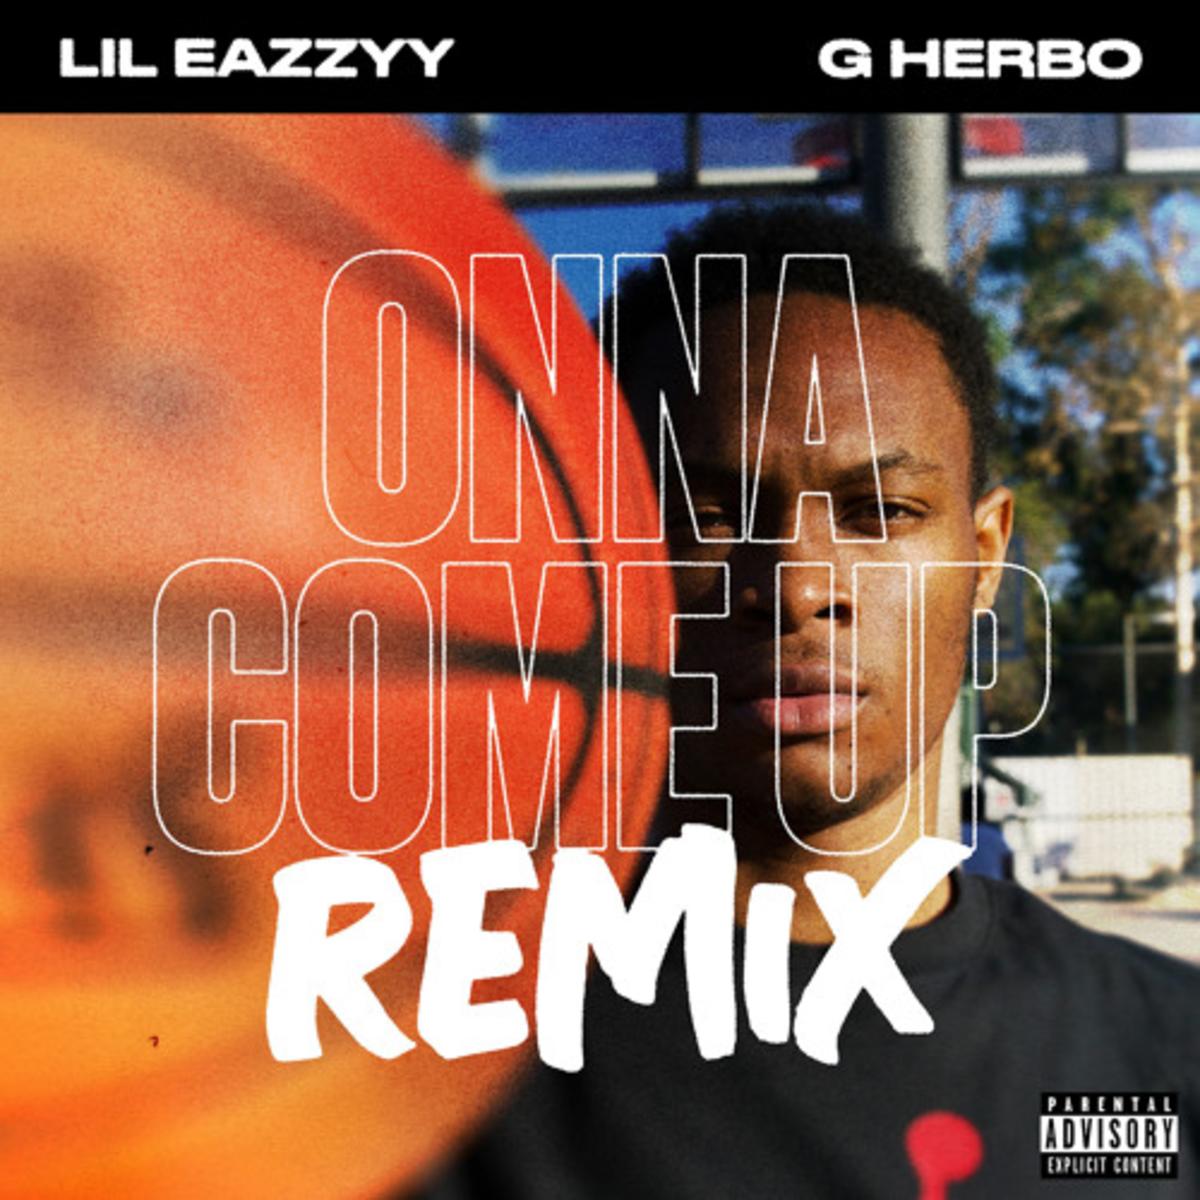 Lil Eazzy Teams Up With G Herbo For “Onna Come Up” Remix